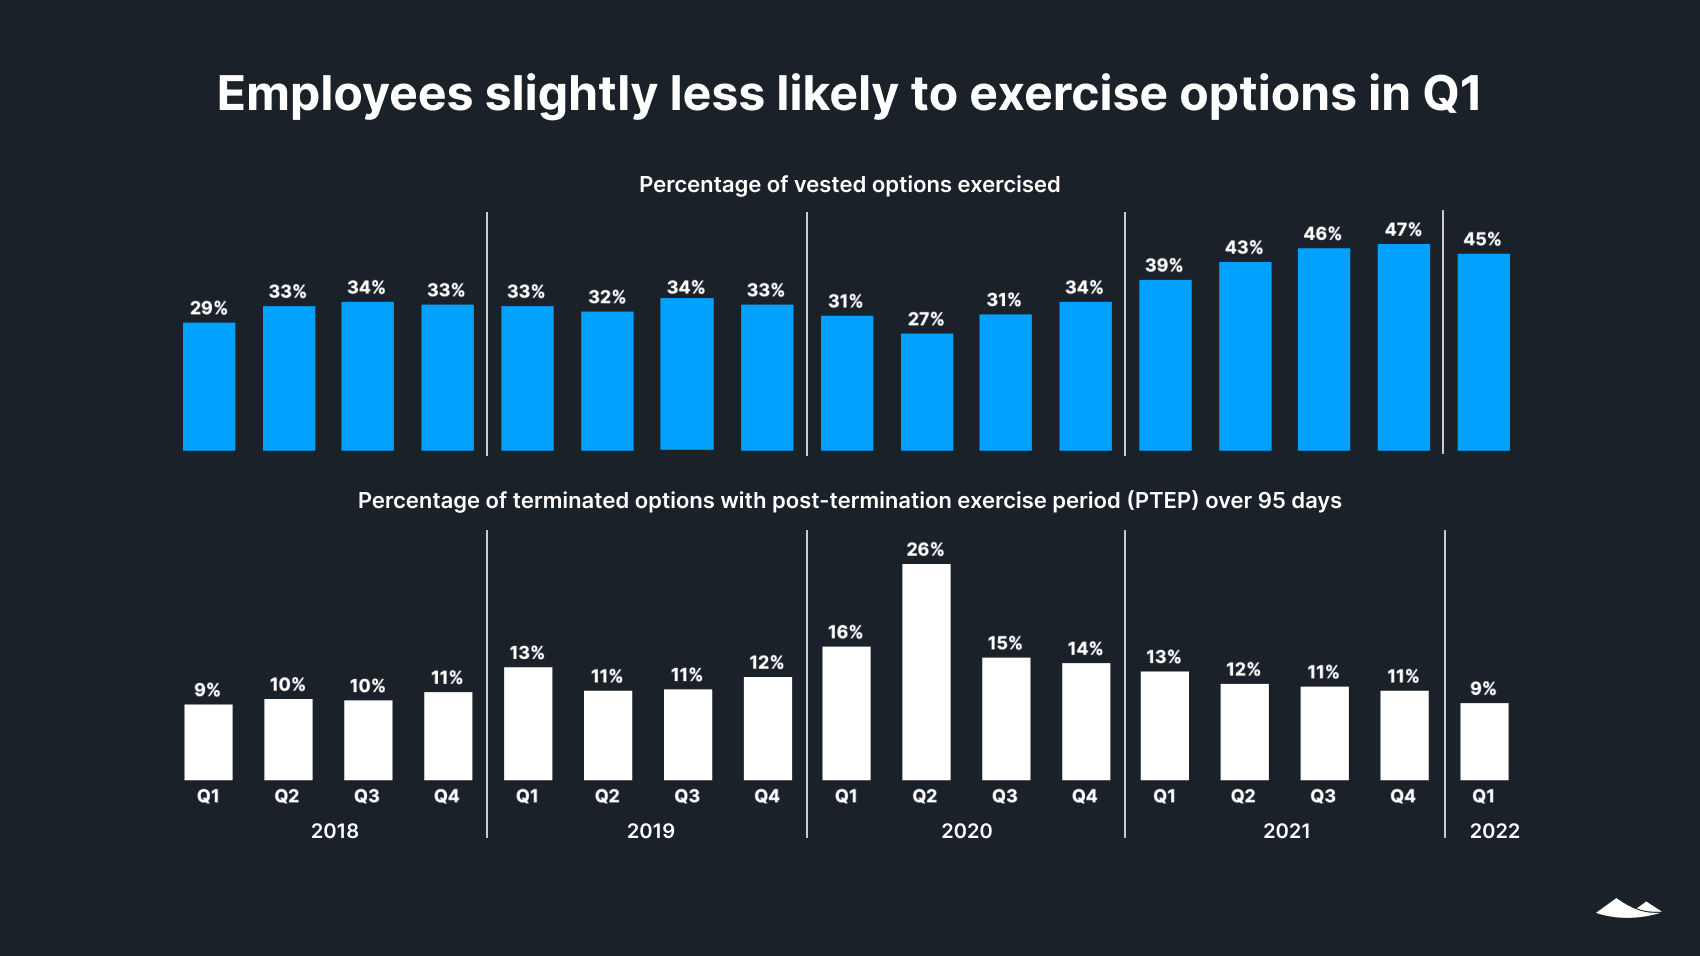 Two bar charts. First shows the percentage of exercised vested employee options dropped in Q1 2022 to 45%. Second shows the percentage of terminated options with PTEP over 95 days continued to decline.